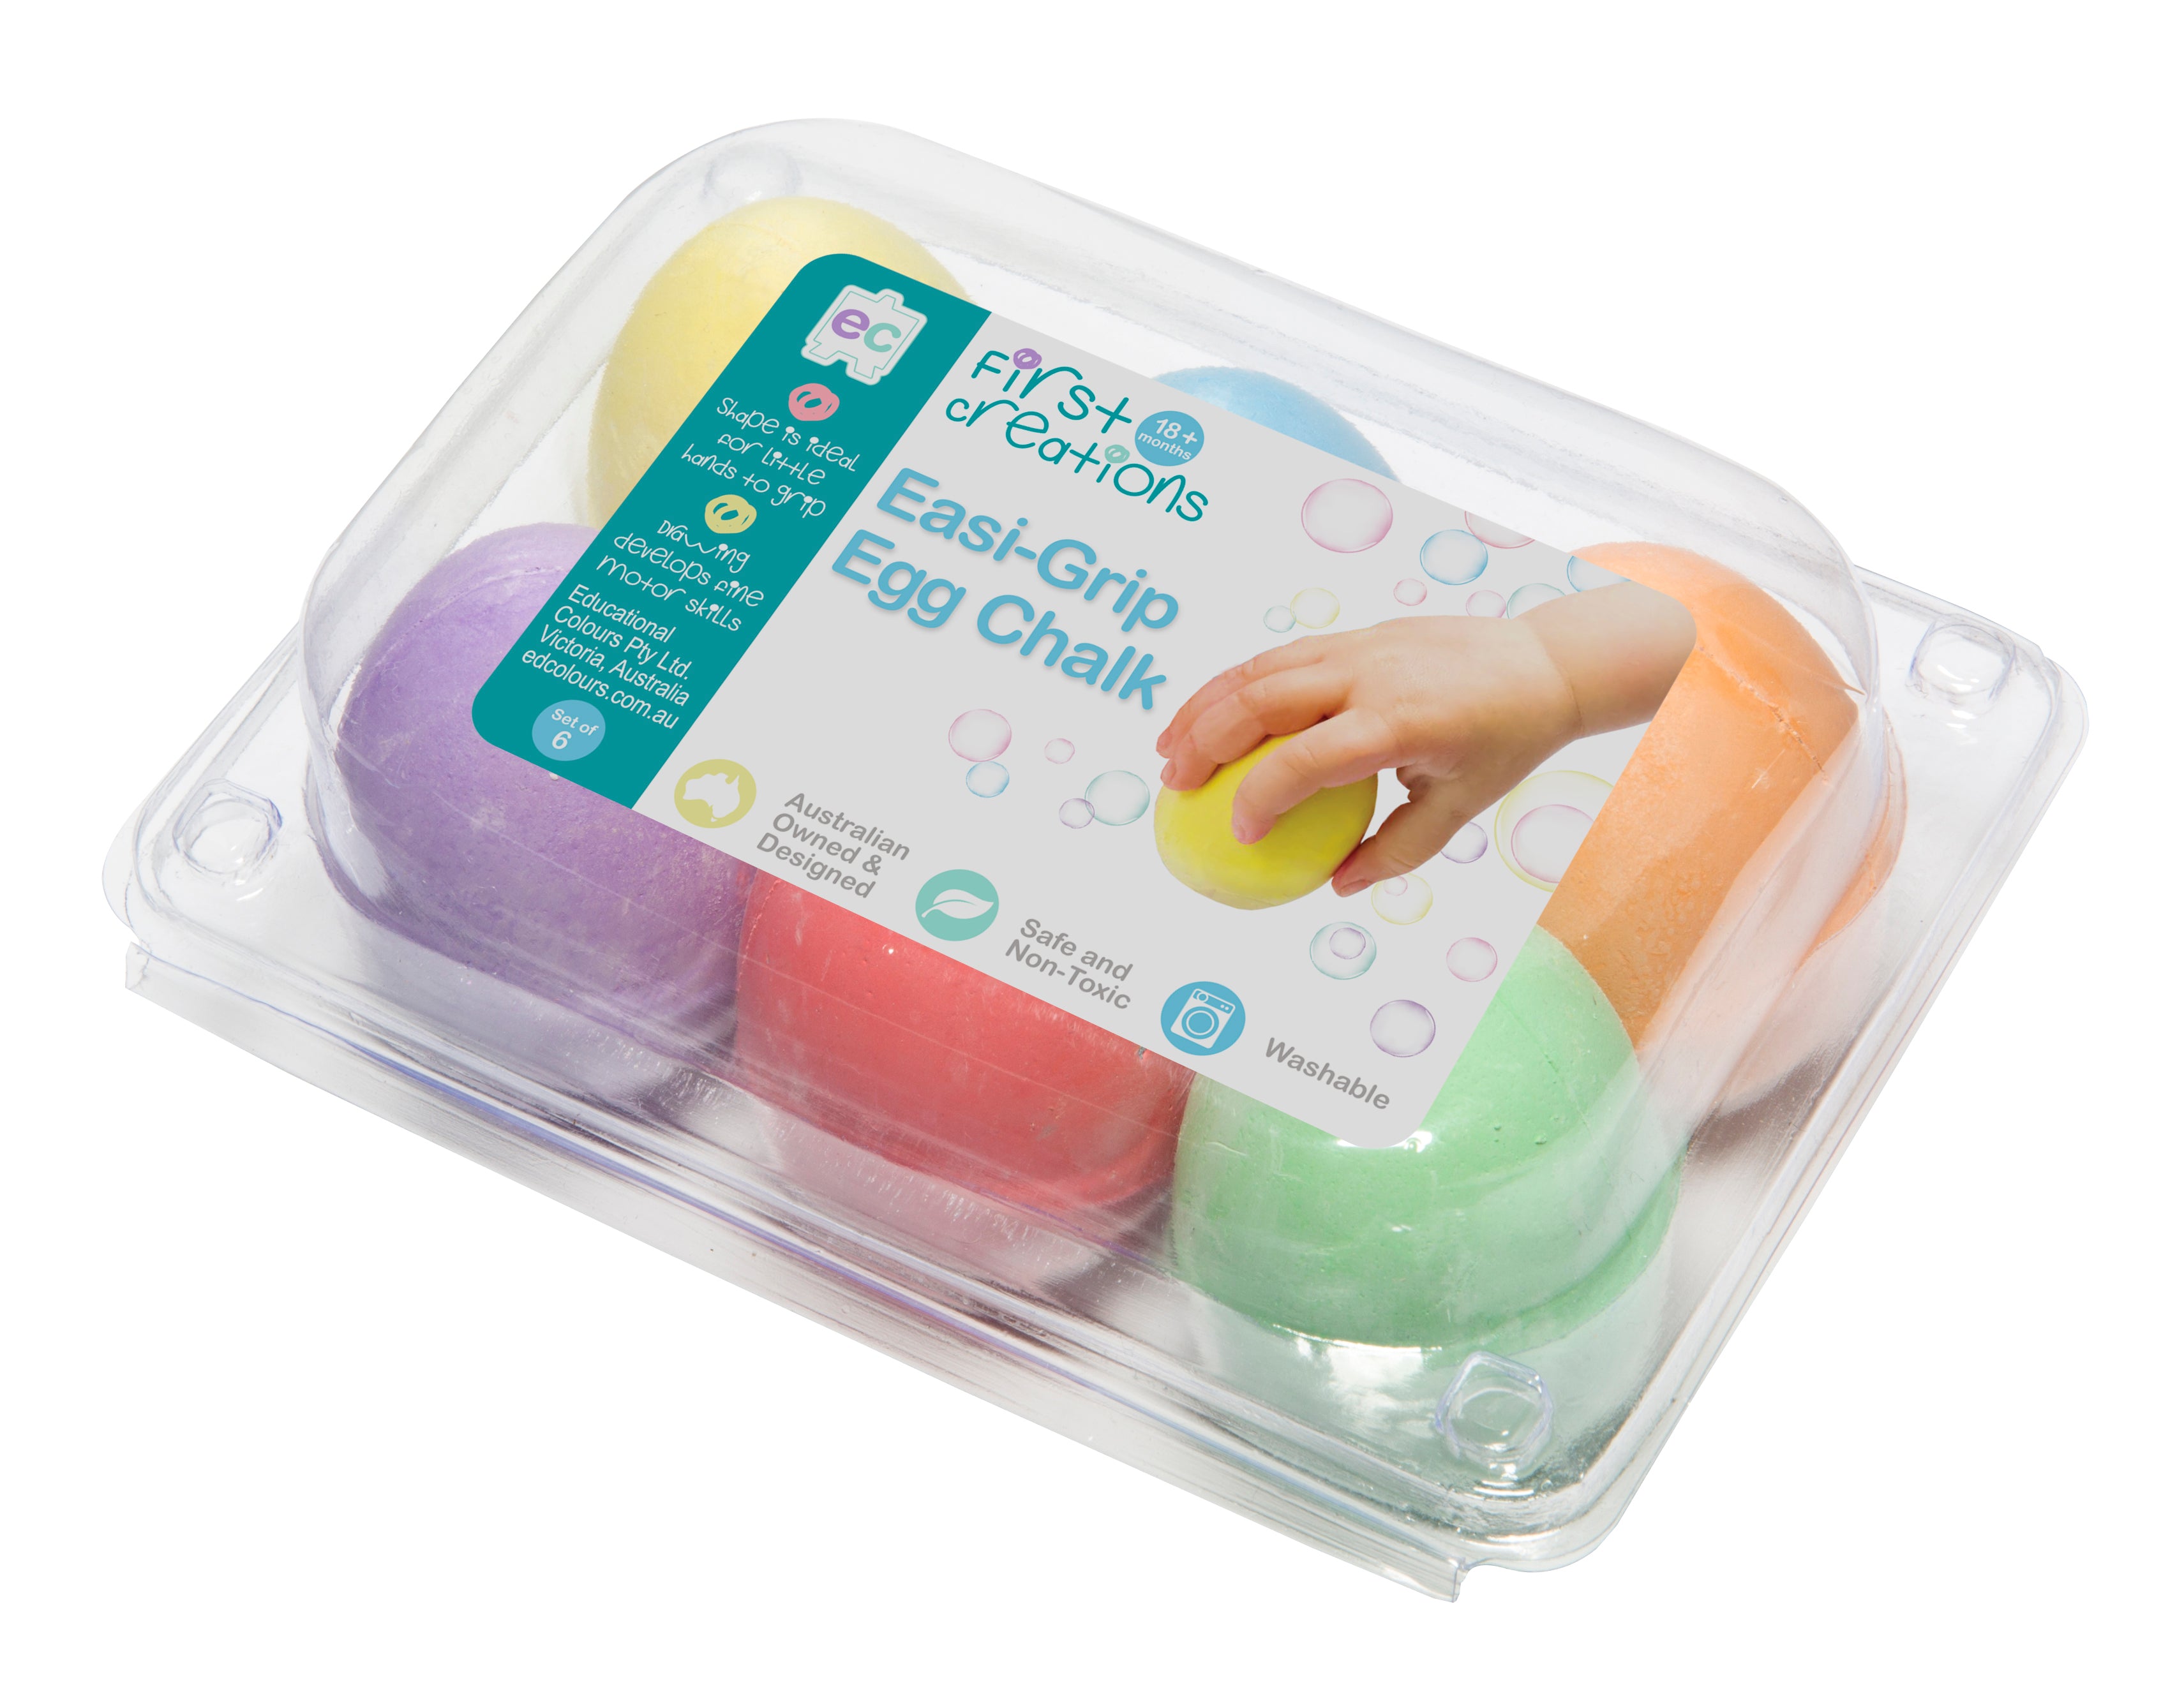 First Creations Easi-Grip Egg Chalk